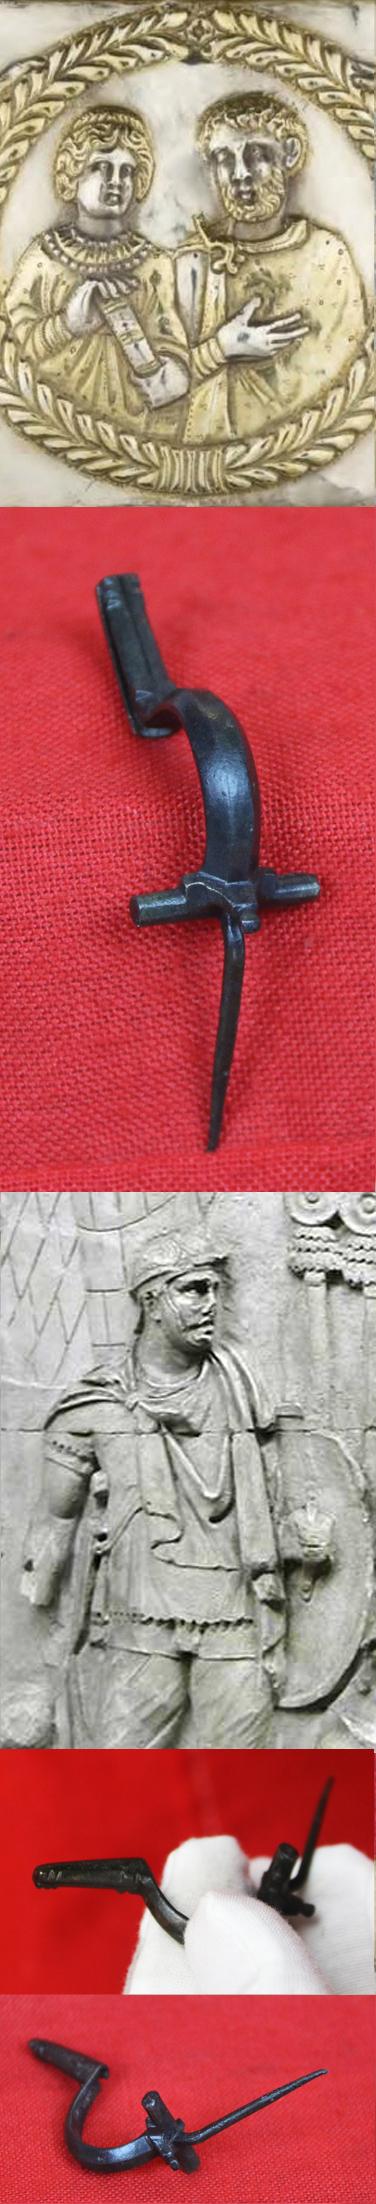 Original Ancient Roman ‘Cross-bow” Fibula Bronze Toga Pin Military Issue, Fine Piece For Higher Ranking Figures in the Legion, Such As a Centurion or Tribune